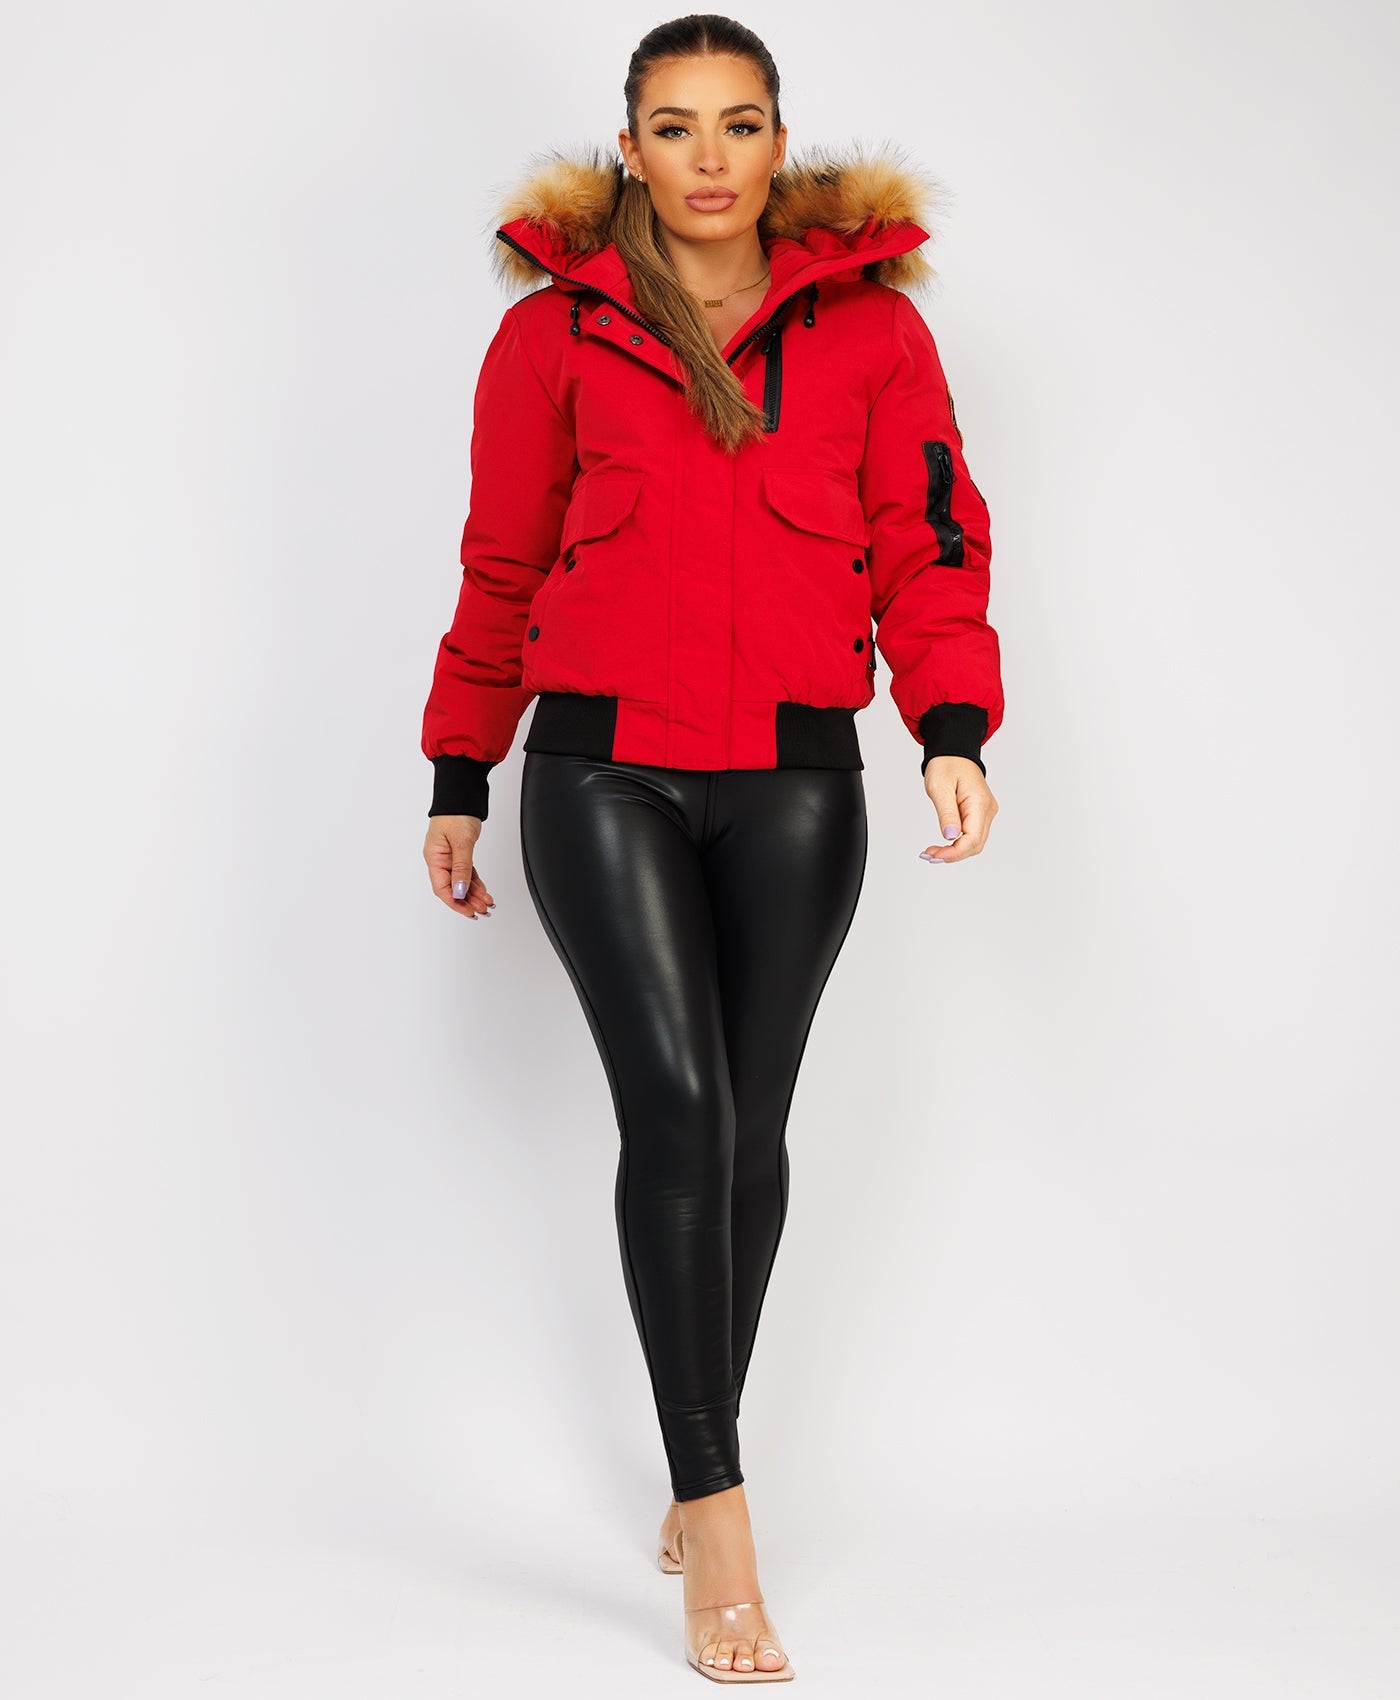 Canada-Bomber-Jacket-With-Fur-Hood-Red-6